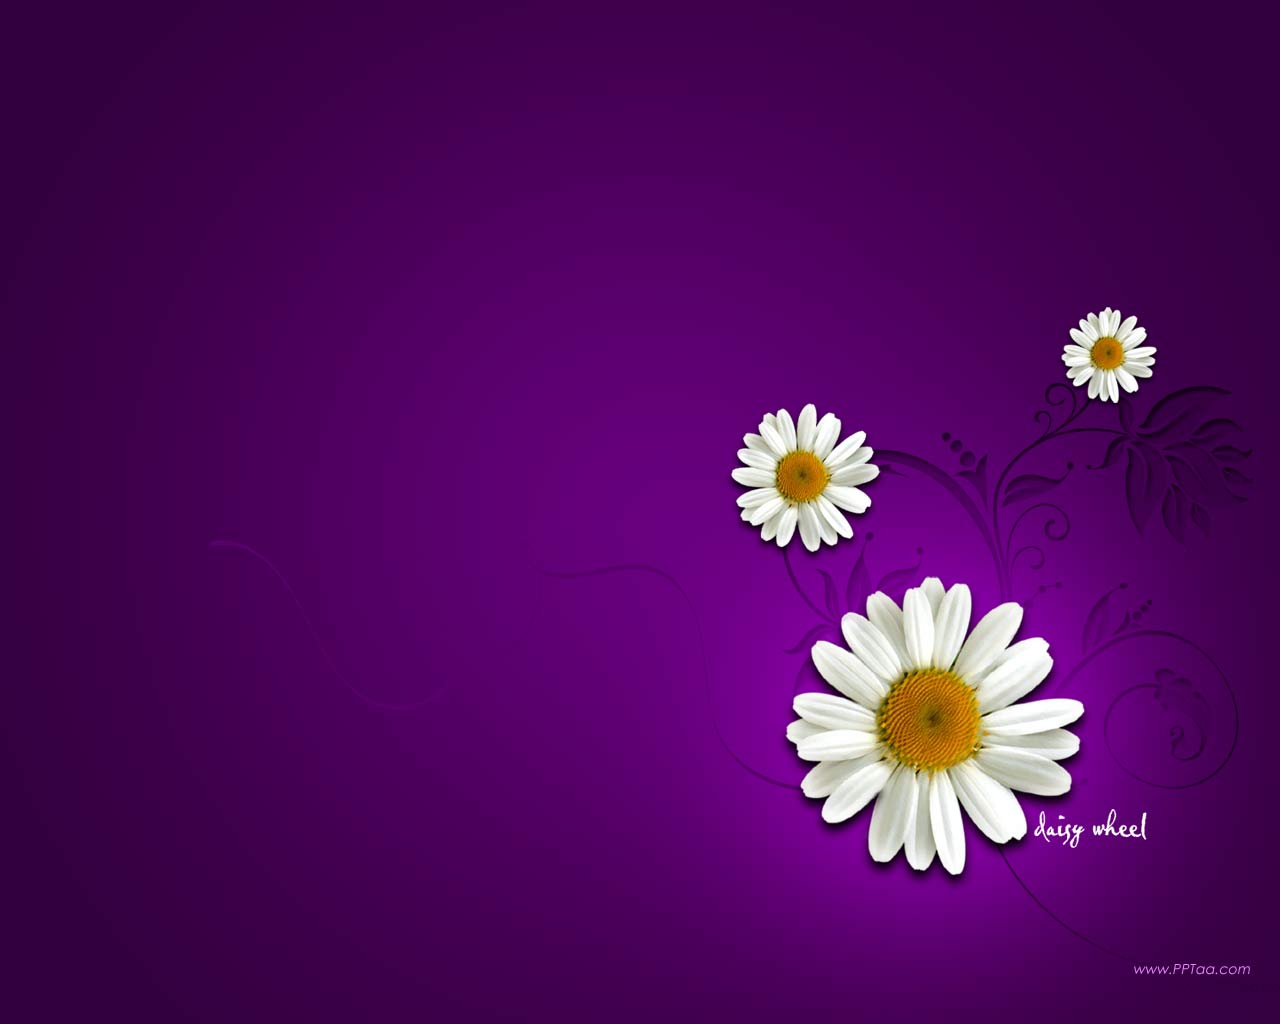 Daisy Wheel Computer Wallpapers For Background